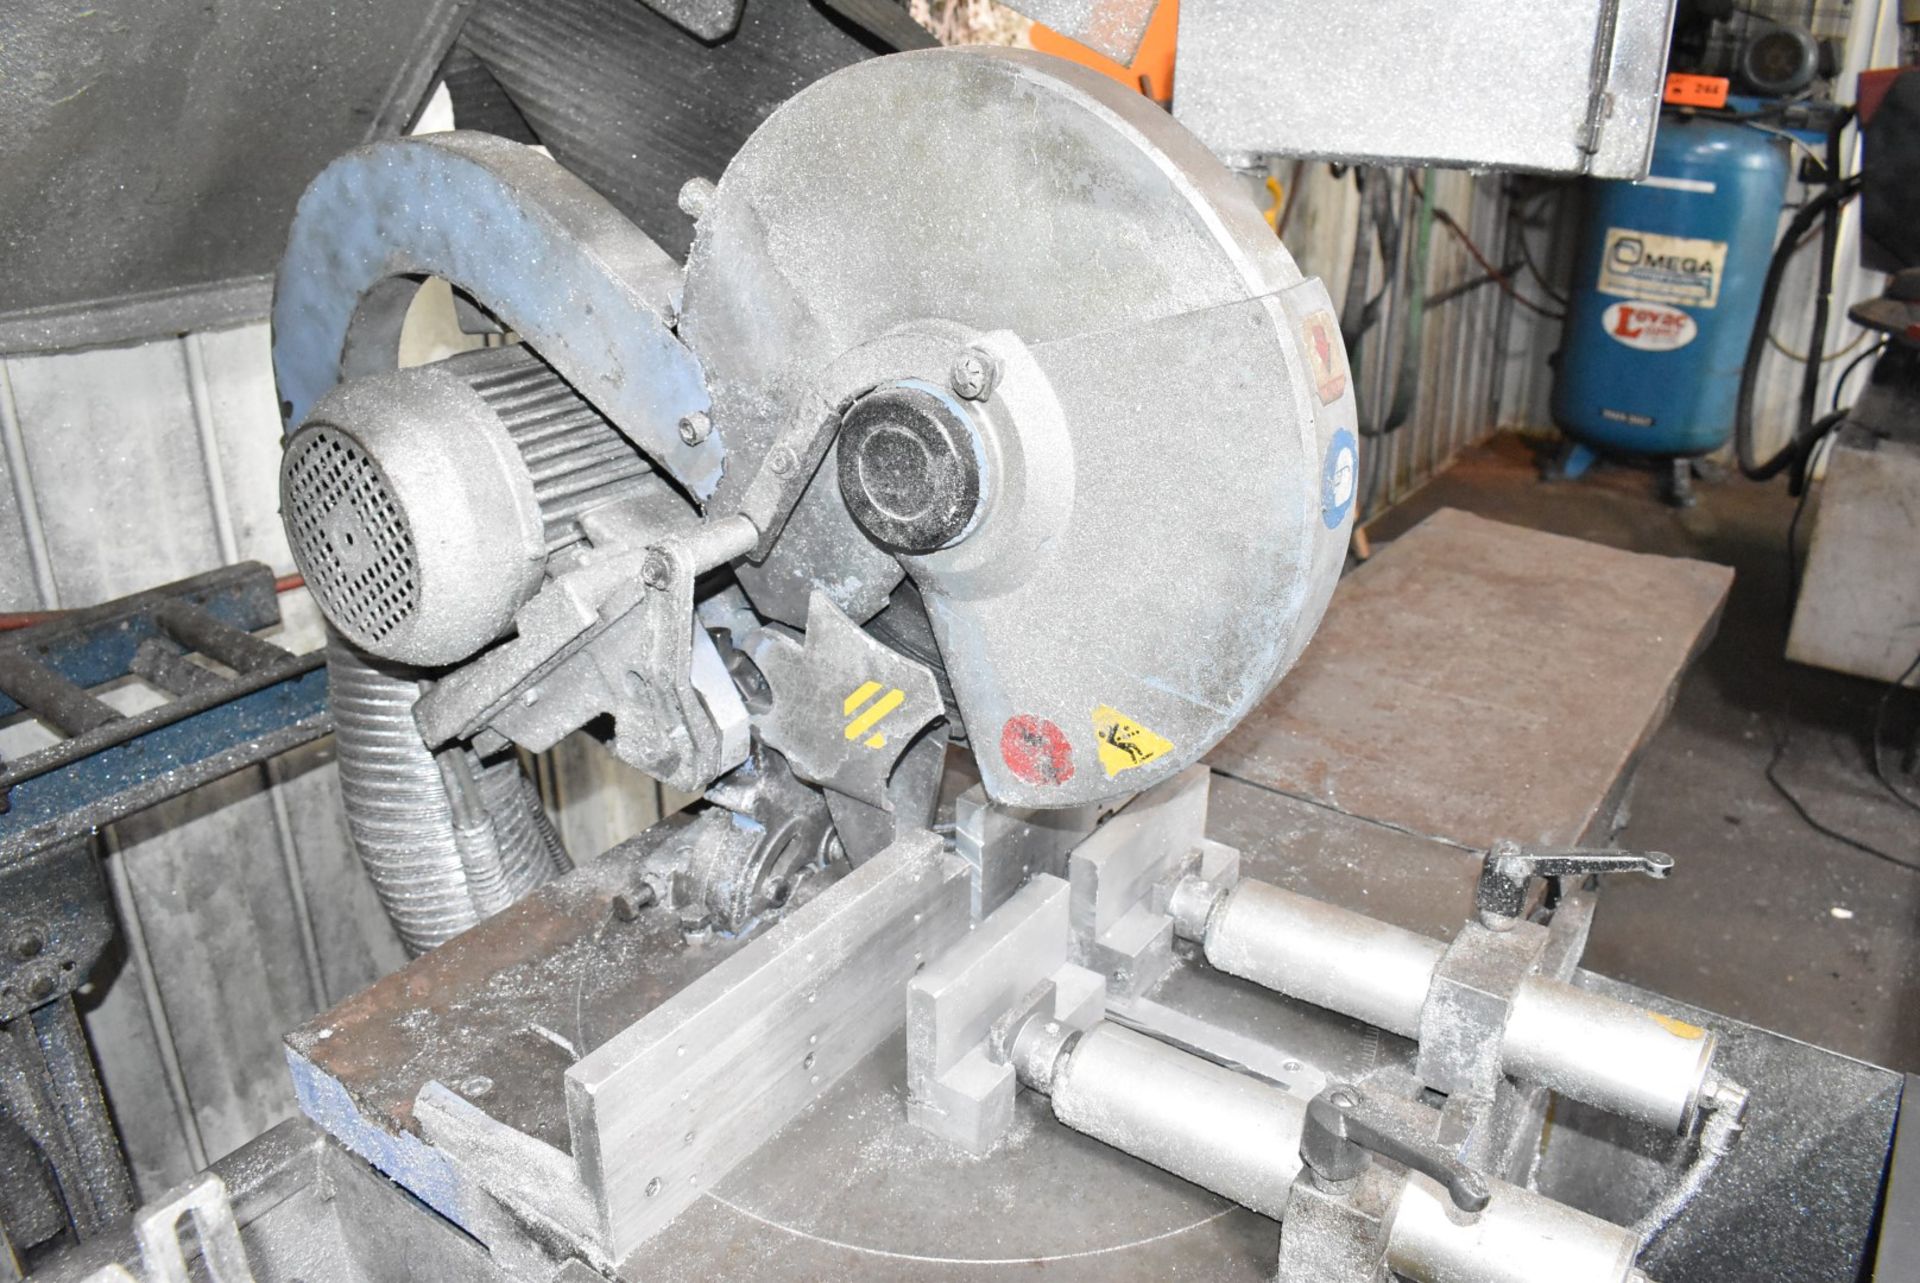 MEP COBRA 350AX AUTOMATIC ABRASIVE CUT OFF SAW, S/N 01953111 (CI) [RIGGING FEE FOR LOT #7 - $250 USD - Image 4 of 6